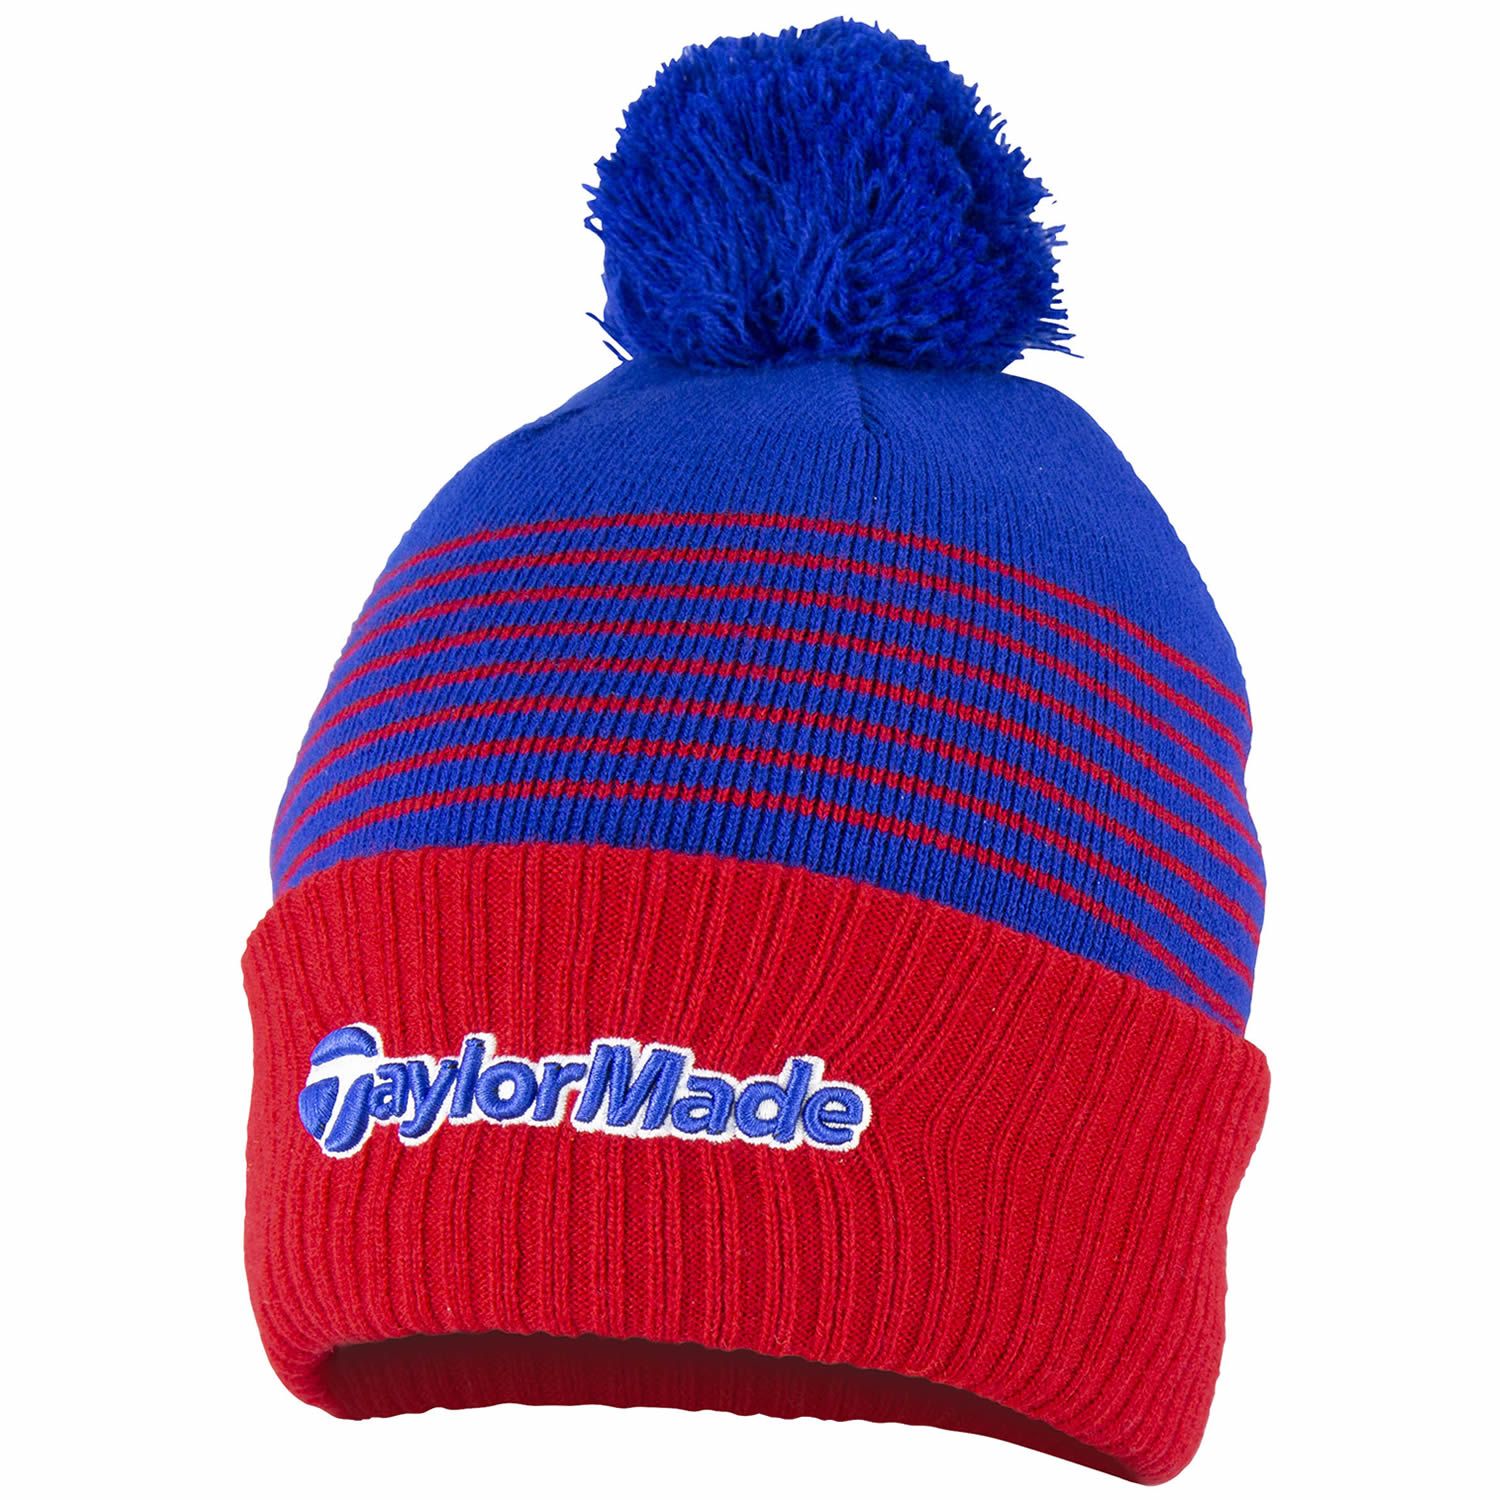 TaylorMade Bobble Winter Beanie Hat